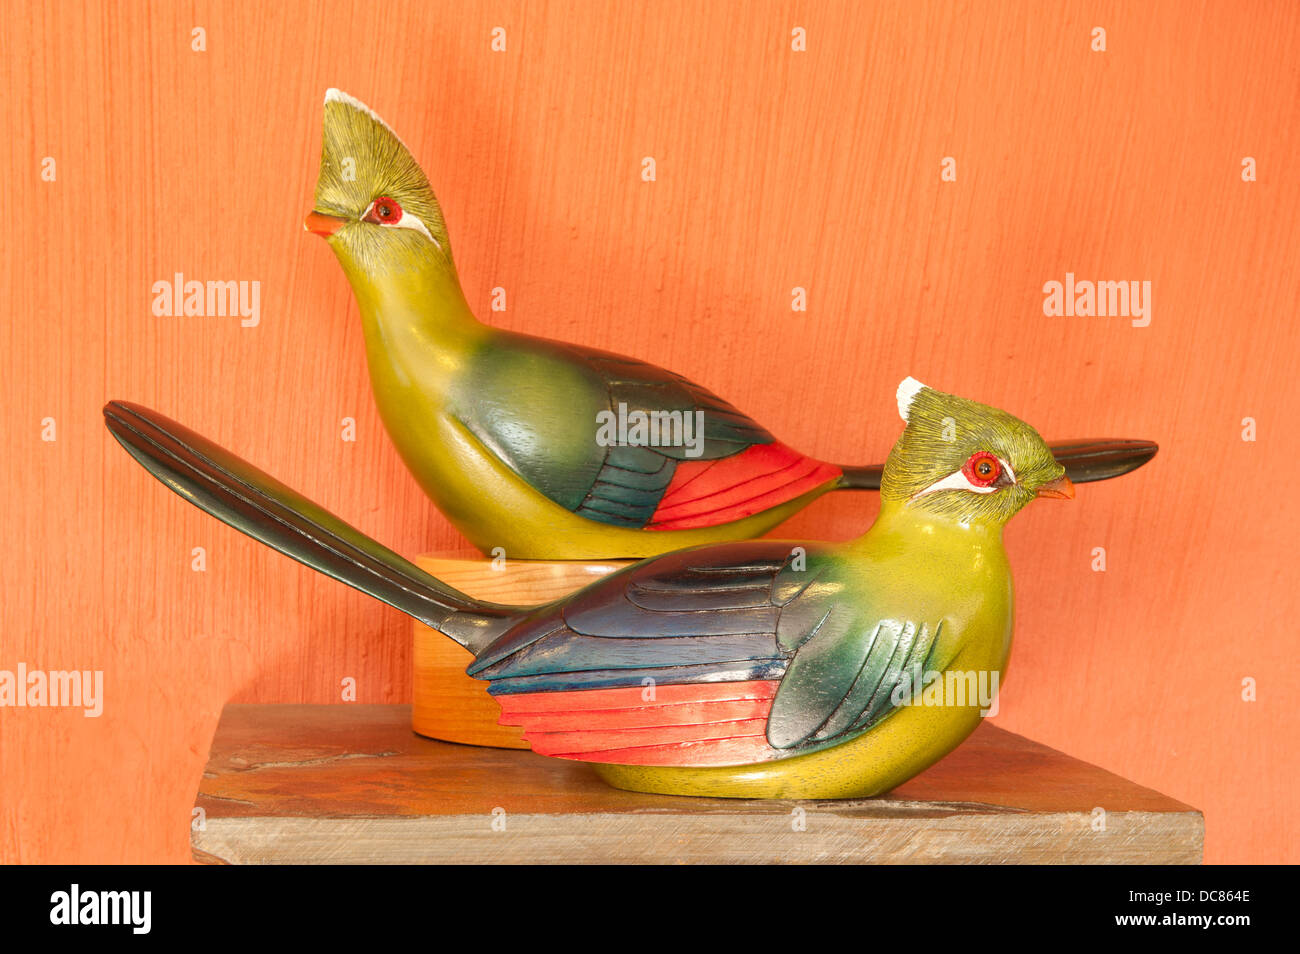 Handcrafted wooden birds (Knysna lourie) for sale at Feathers of Knysna, Knysna, Western Cape, South Africa Stock Photo